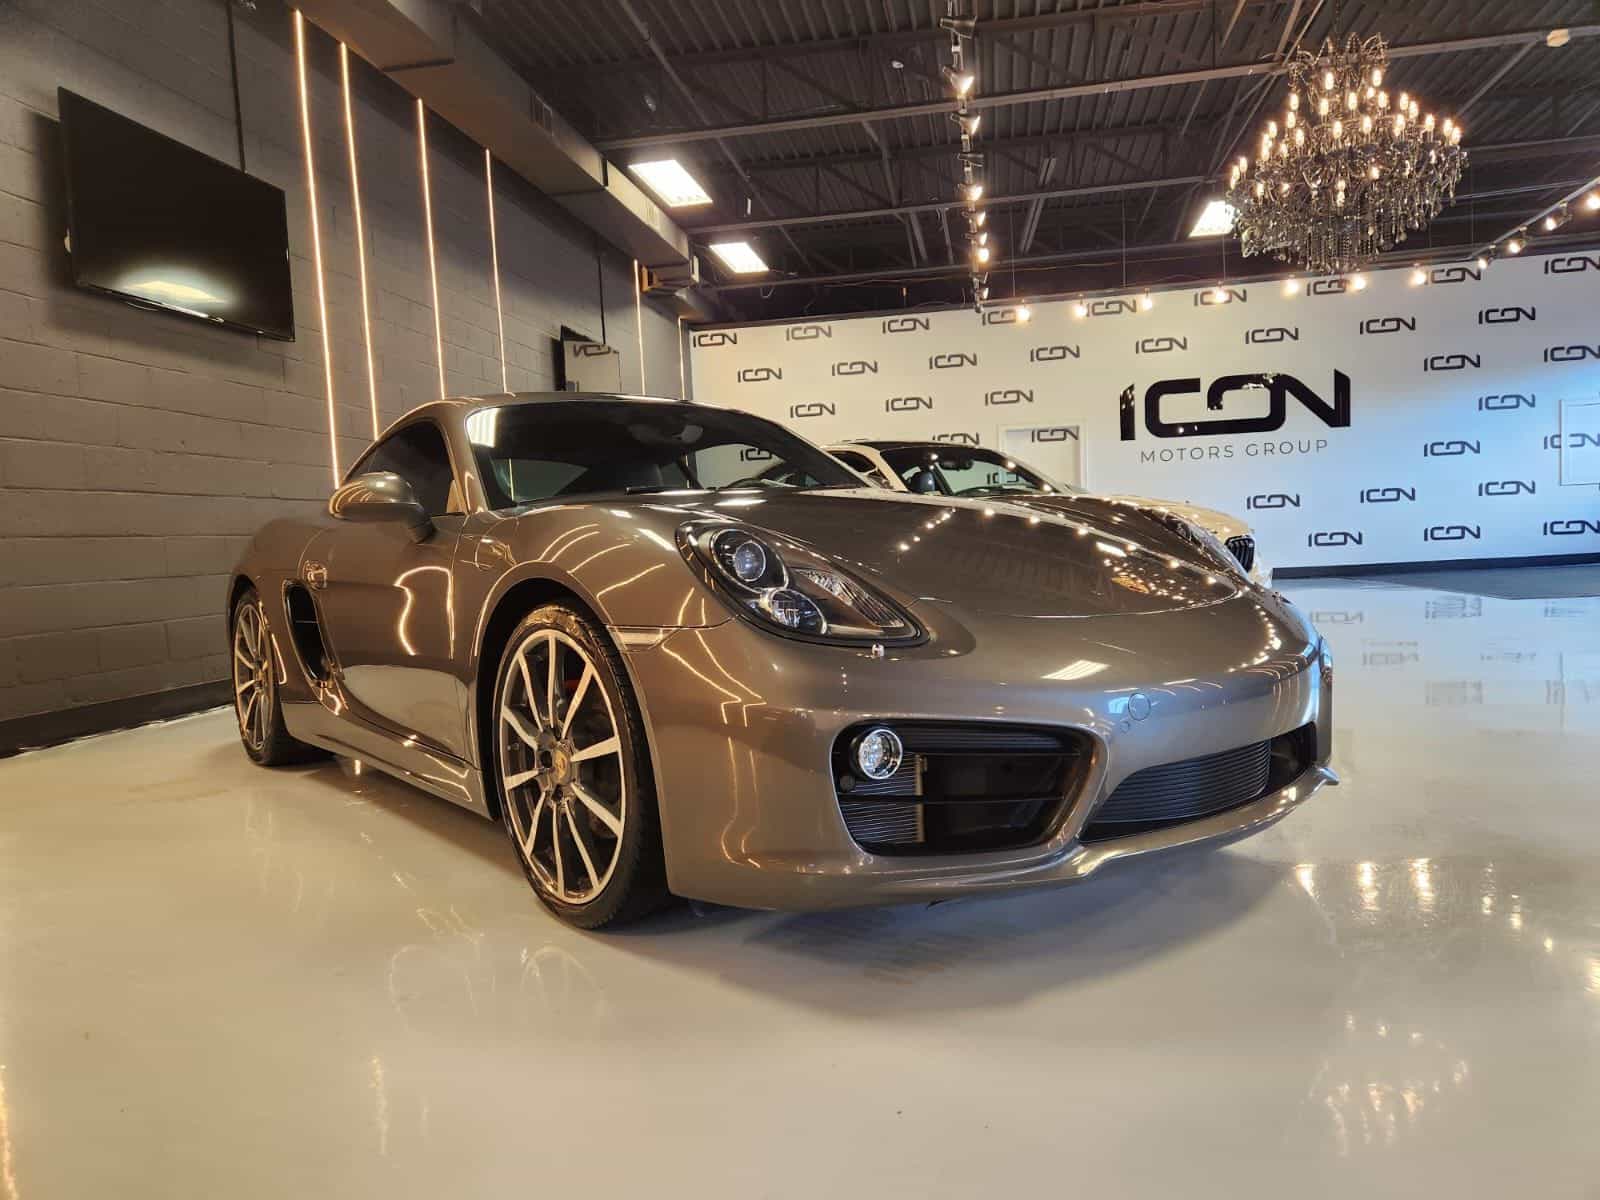 2015 Porsche Cayman - 10k mile 981 Cayman S PDK - Used - VIN WP0AB2A85FK184900 - 10,182 Miles - 6 cyl - 2WD - Automatic - Coupe - Gray - Boston, MA 02155, United States